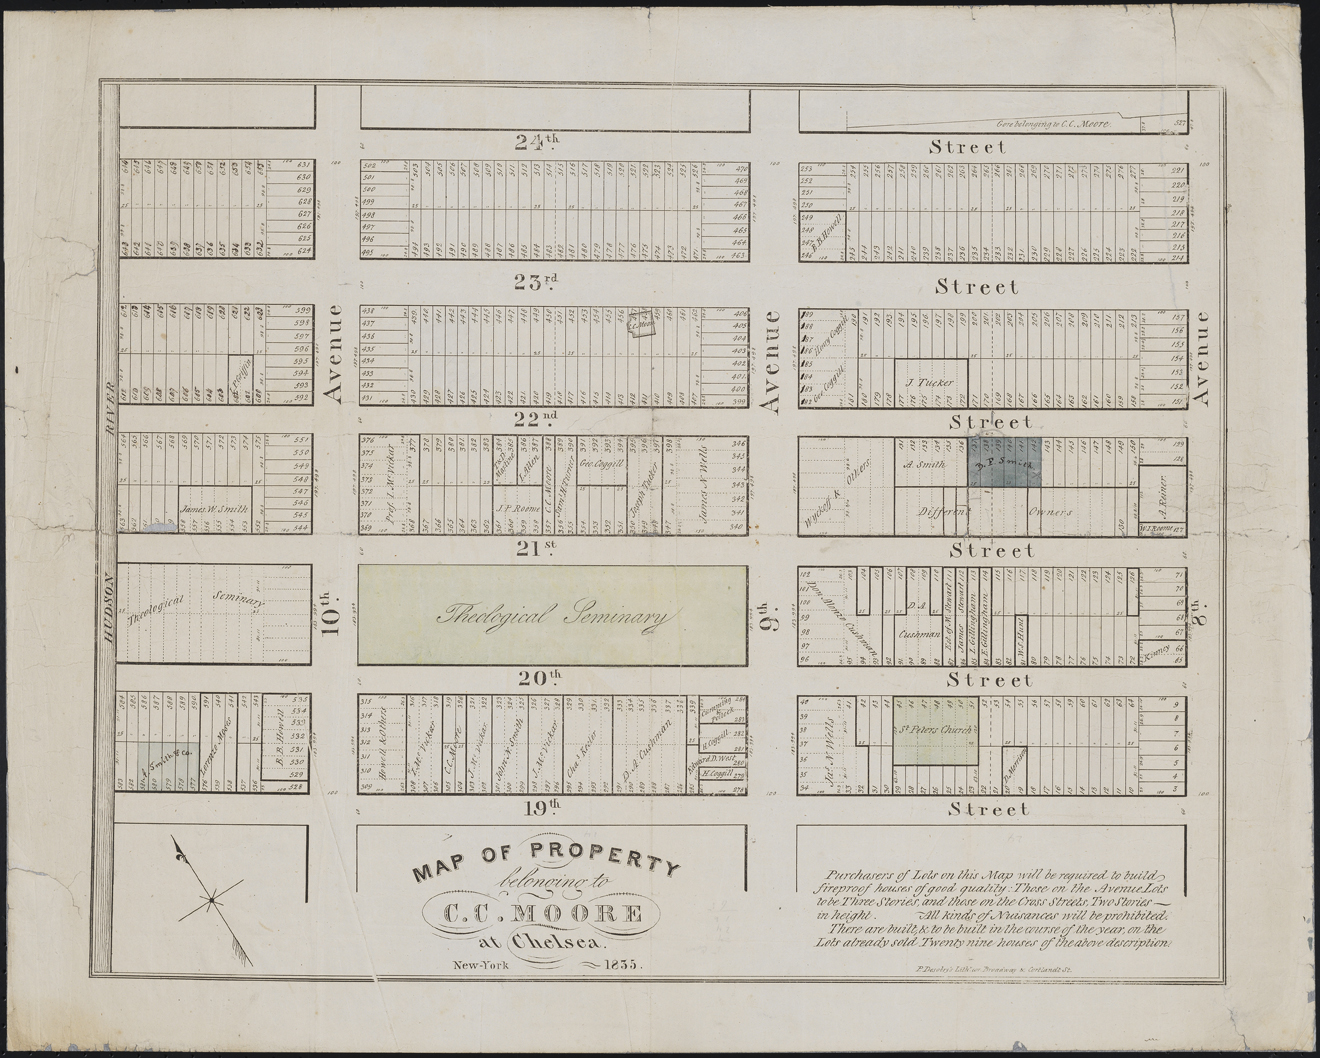 Prosper Desobry. Map of Property belonging to C.C. Moore at Chelsea. 1835. Museum of the City of New York. 47.294.2